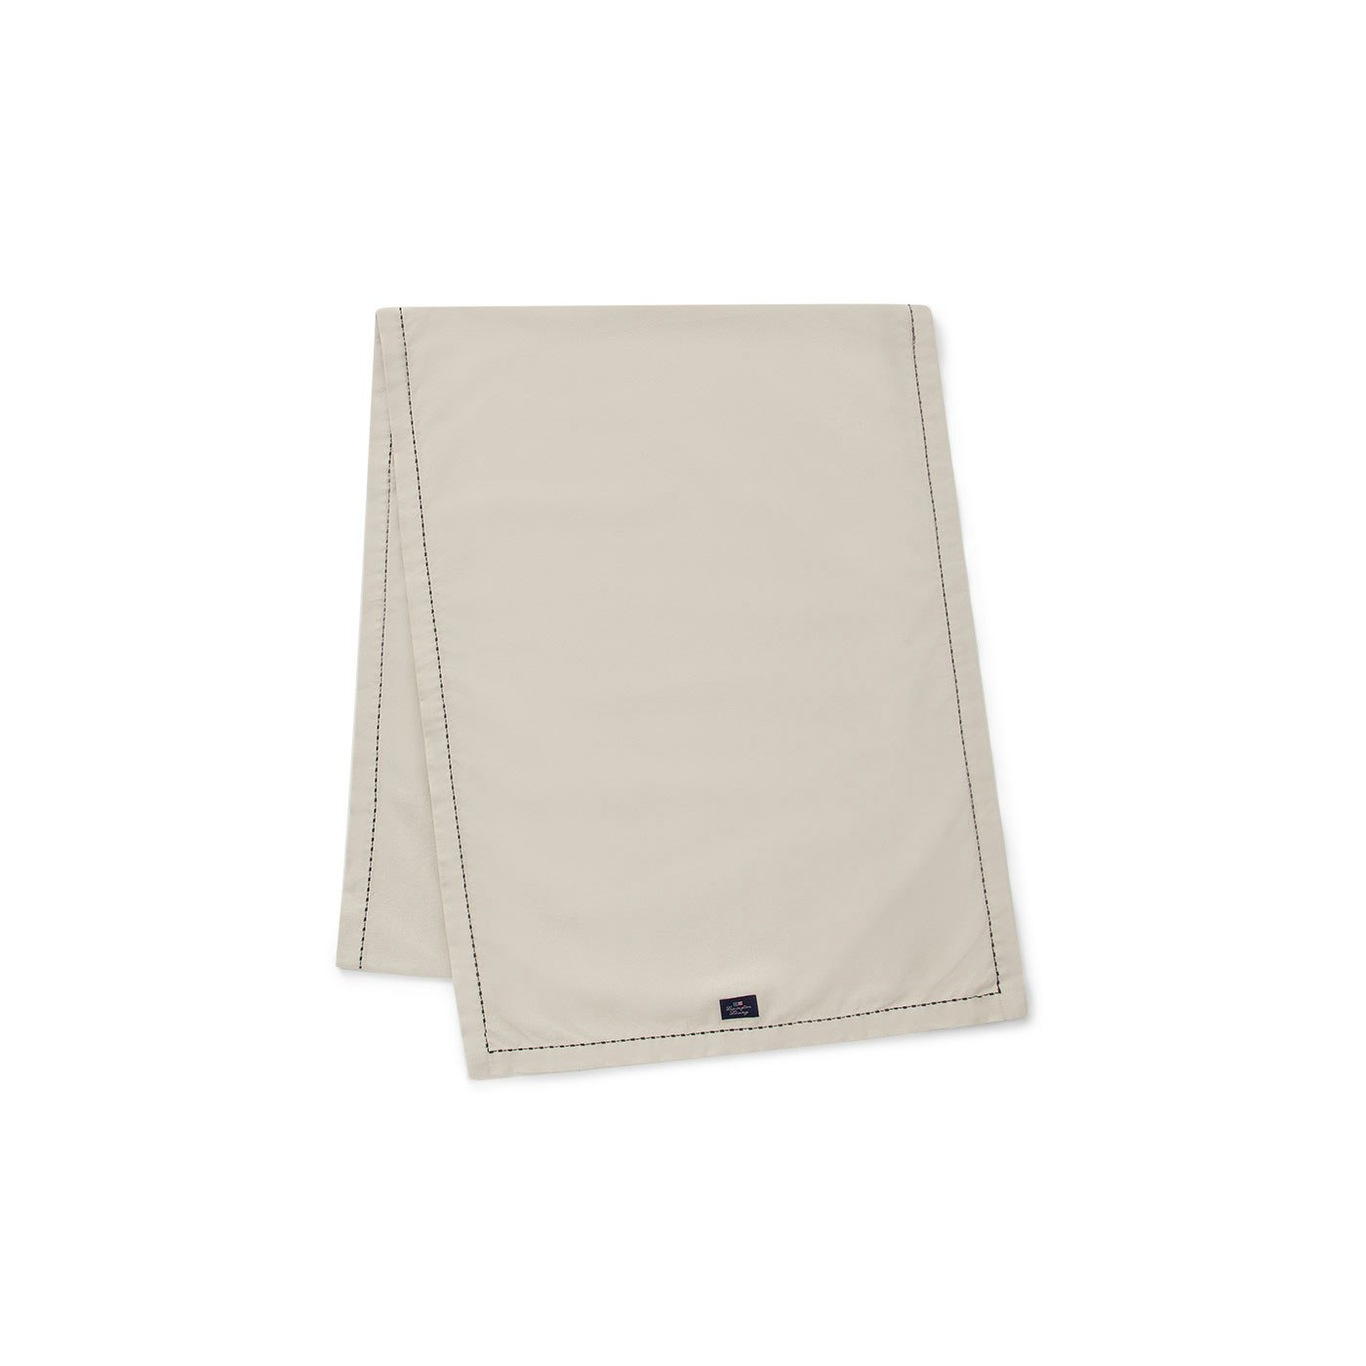 Organic Cotton Oxford Table Runner With Heavy Stitches 250x50 cm, Beige